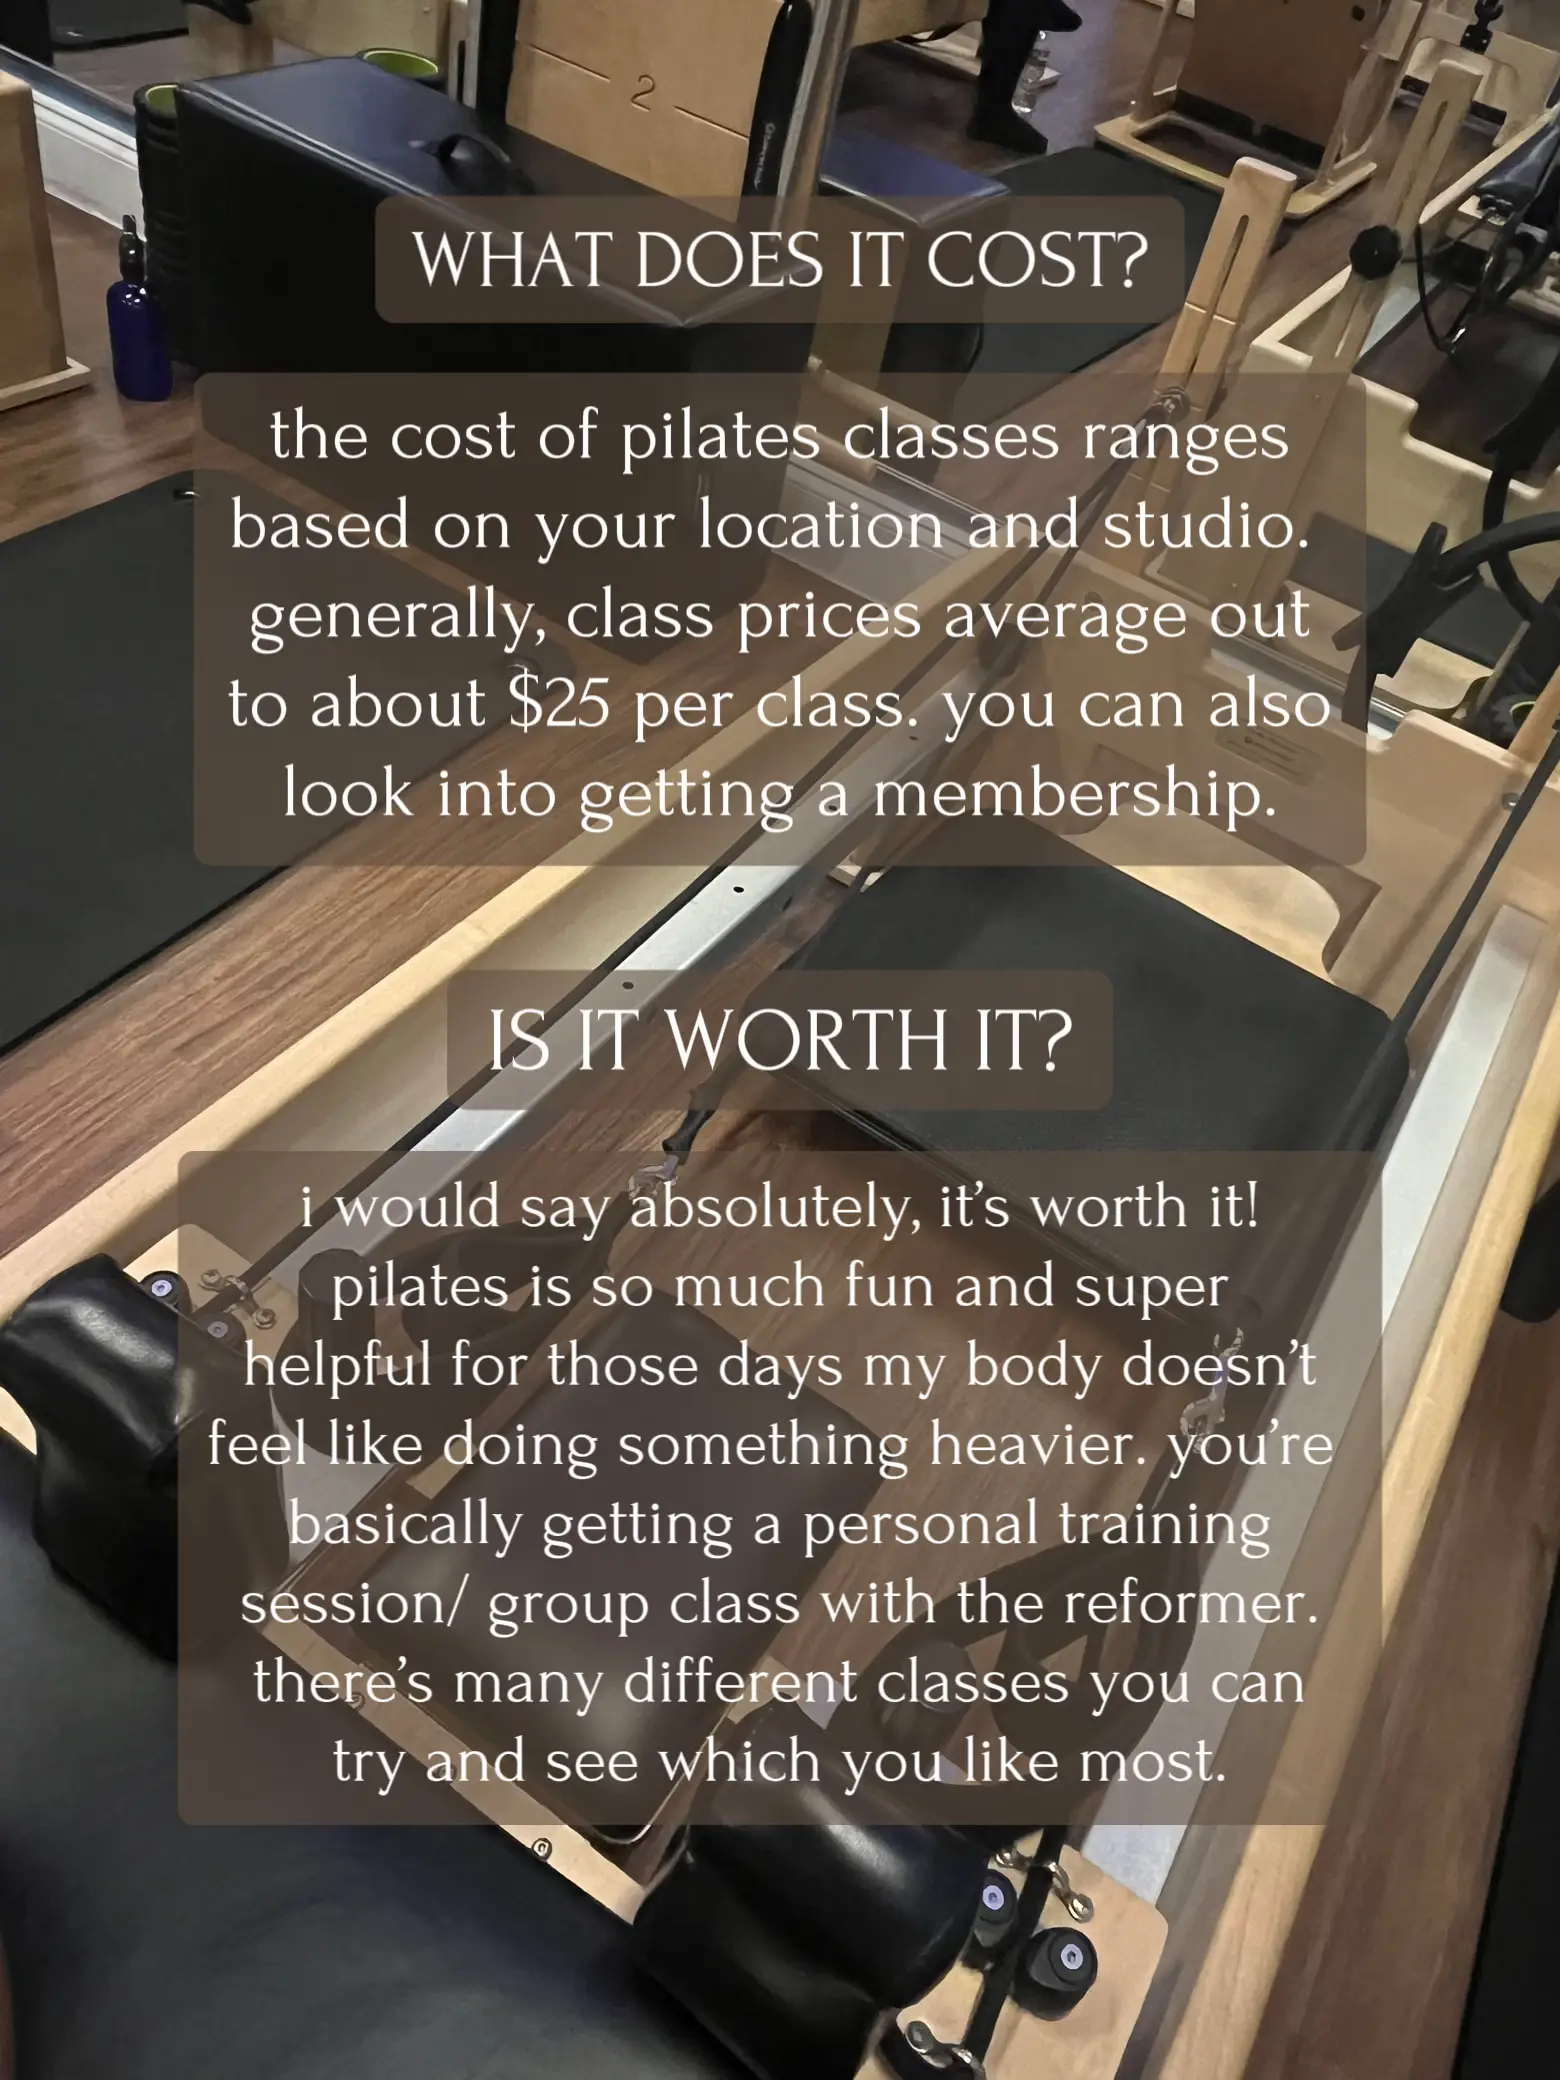 How Much Does Pilates Cost?